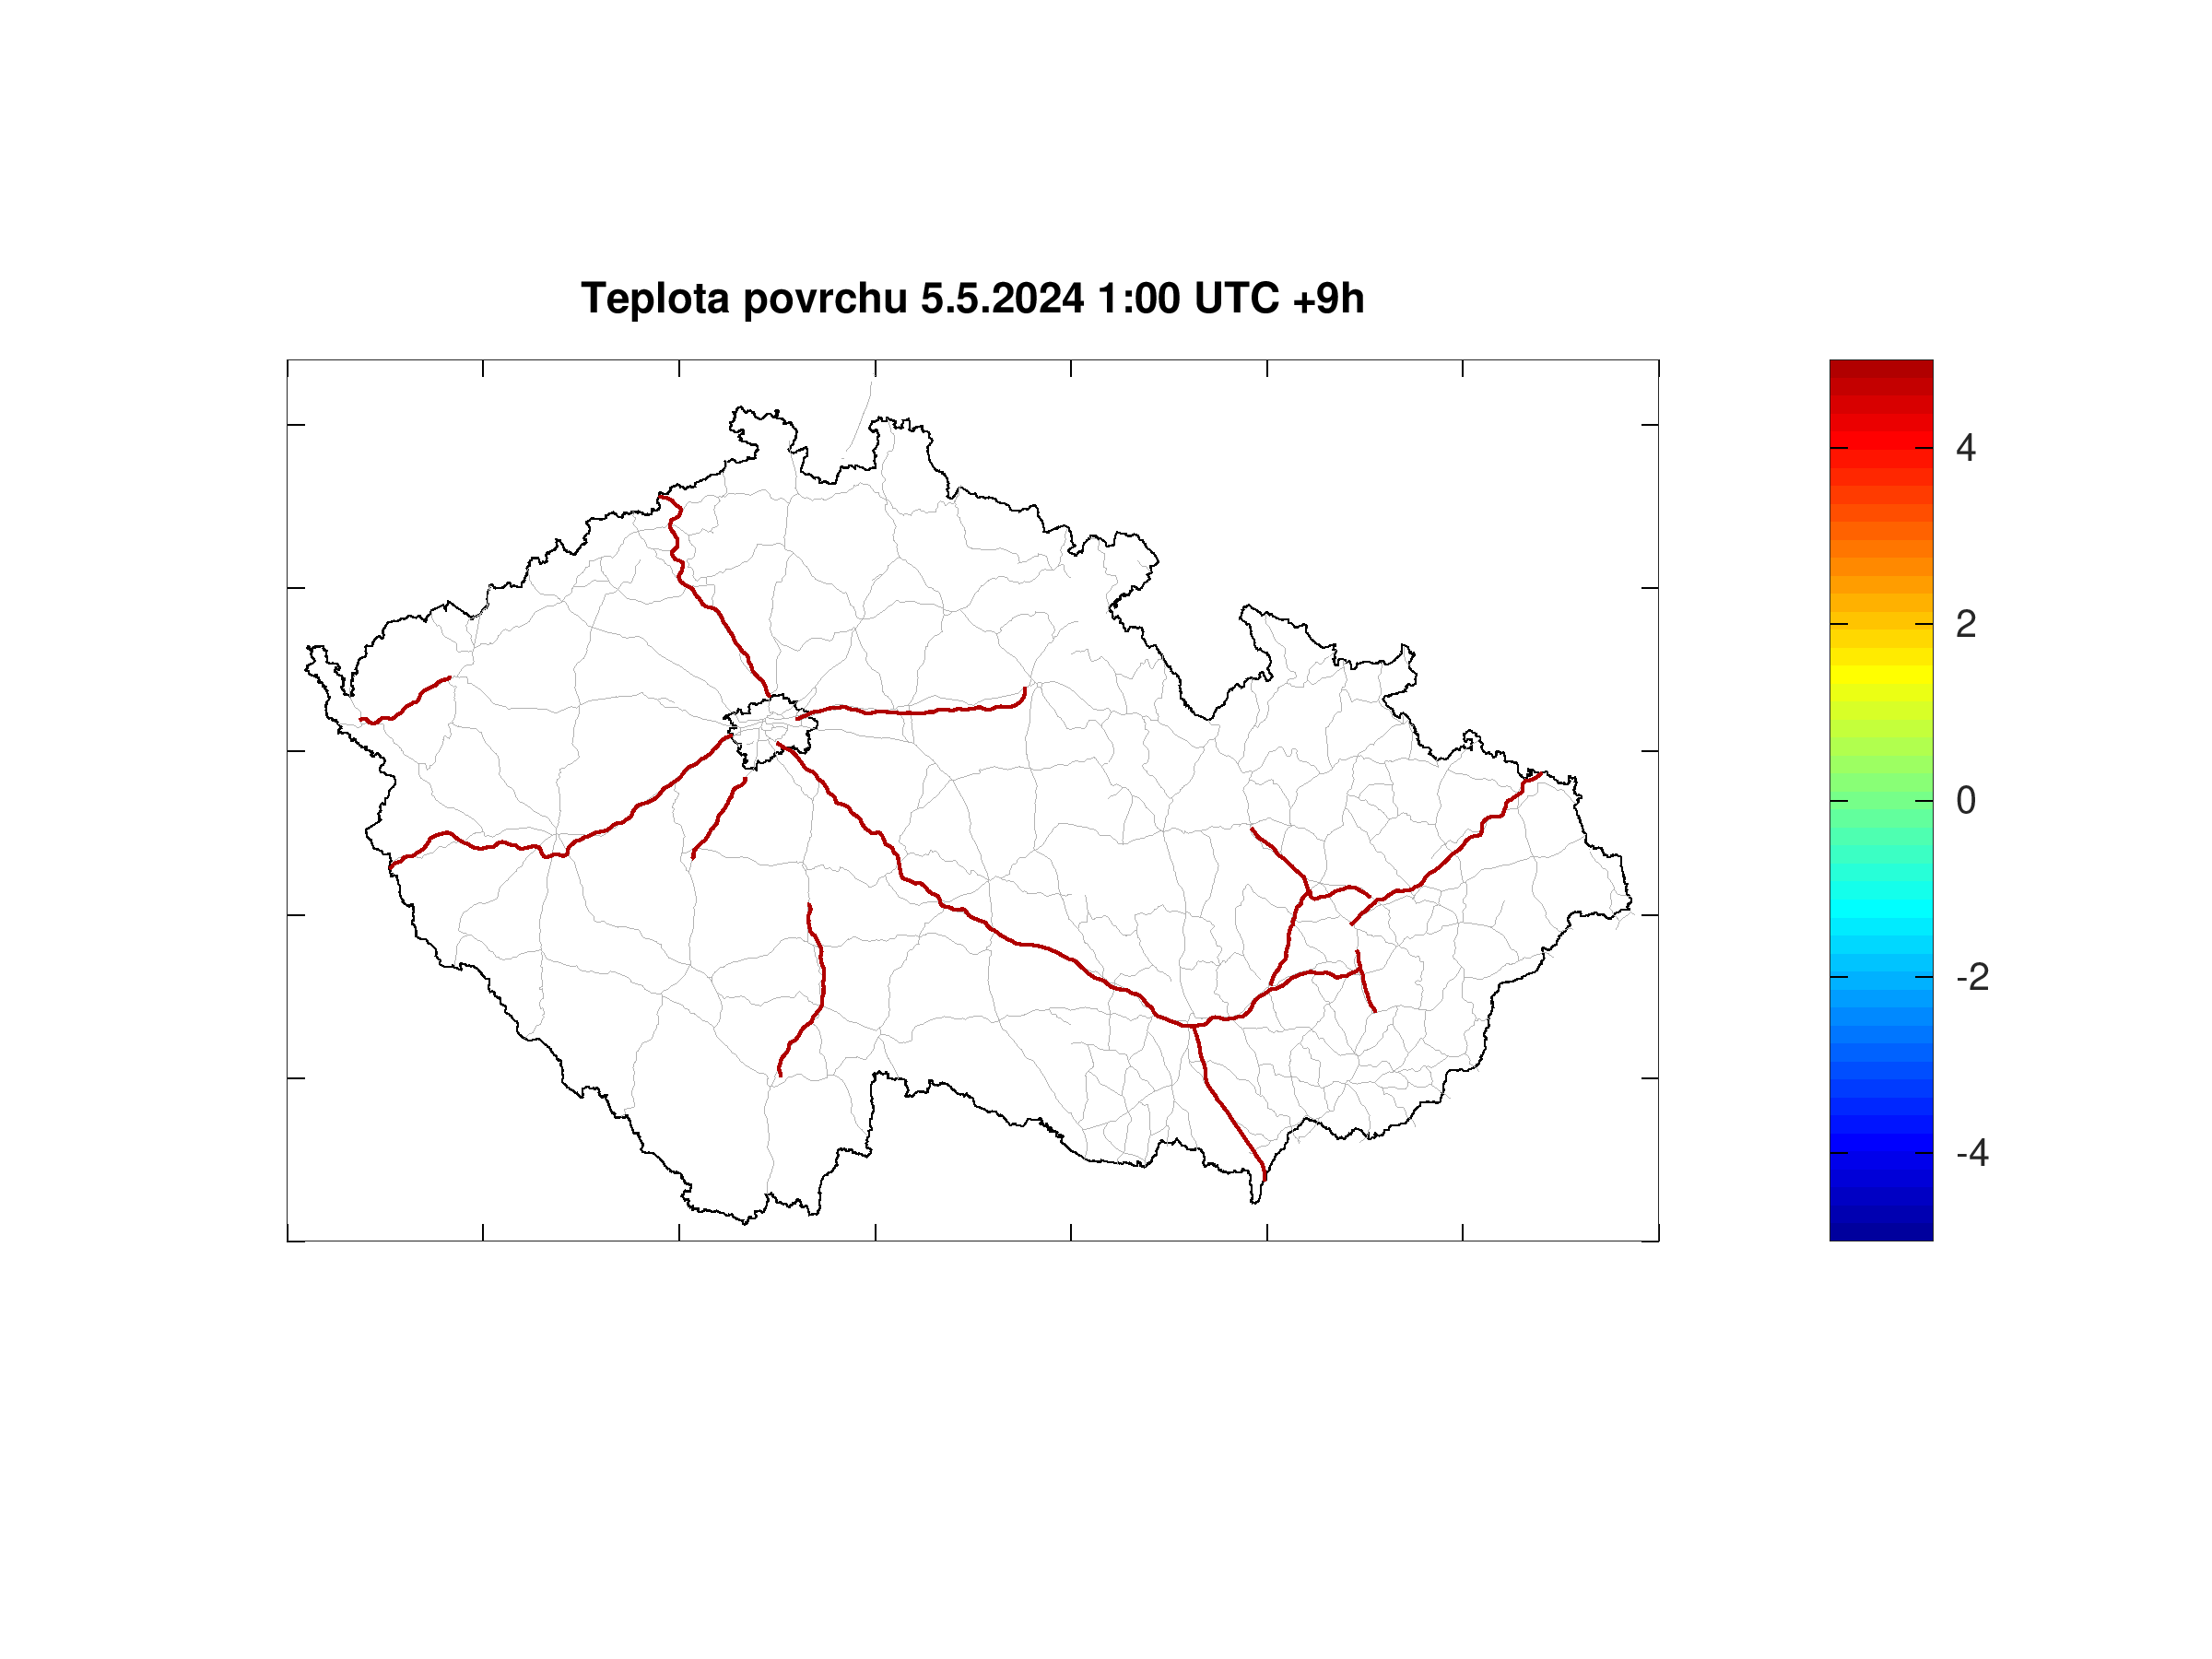 Road surface teperature forecast for Czech highways +9h